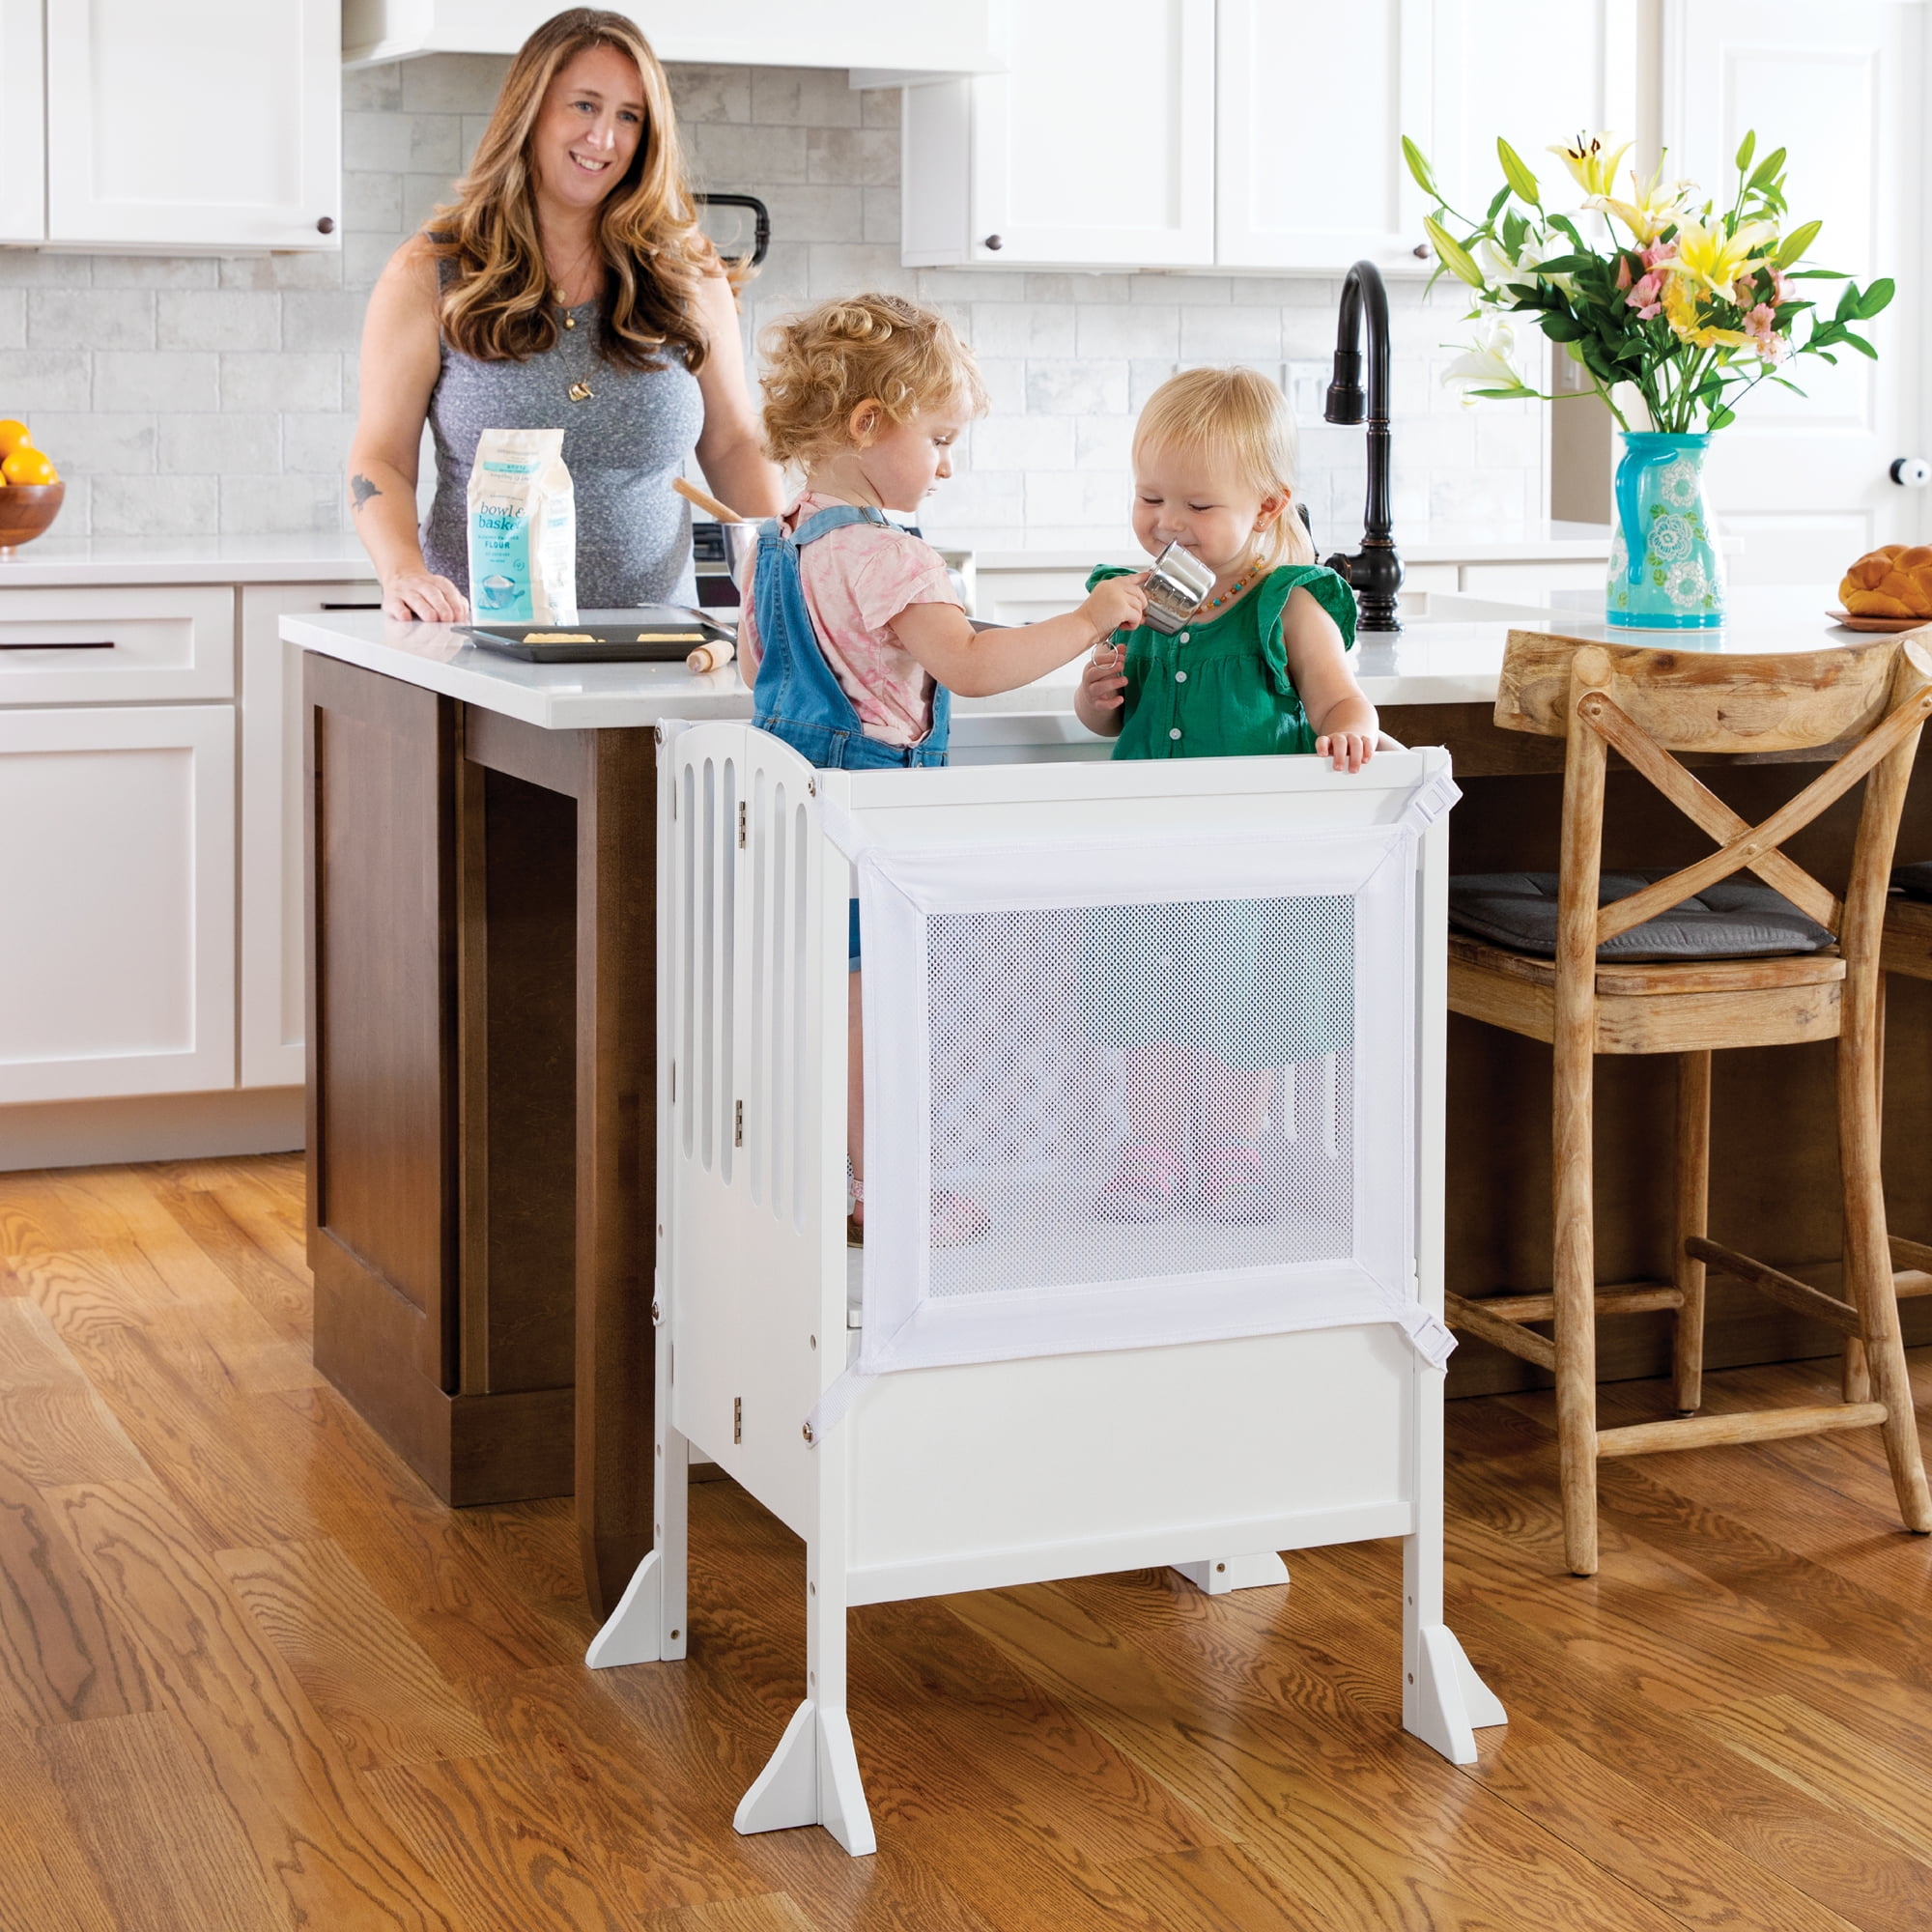 Kitchen Buddy 2-in-1 Kids Helper Stool Possibly Only $26 at Walmart  (Regularly $40)